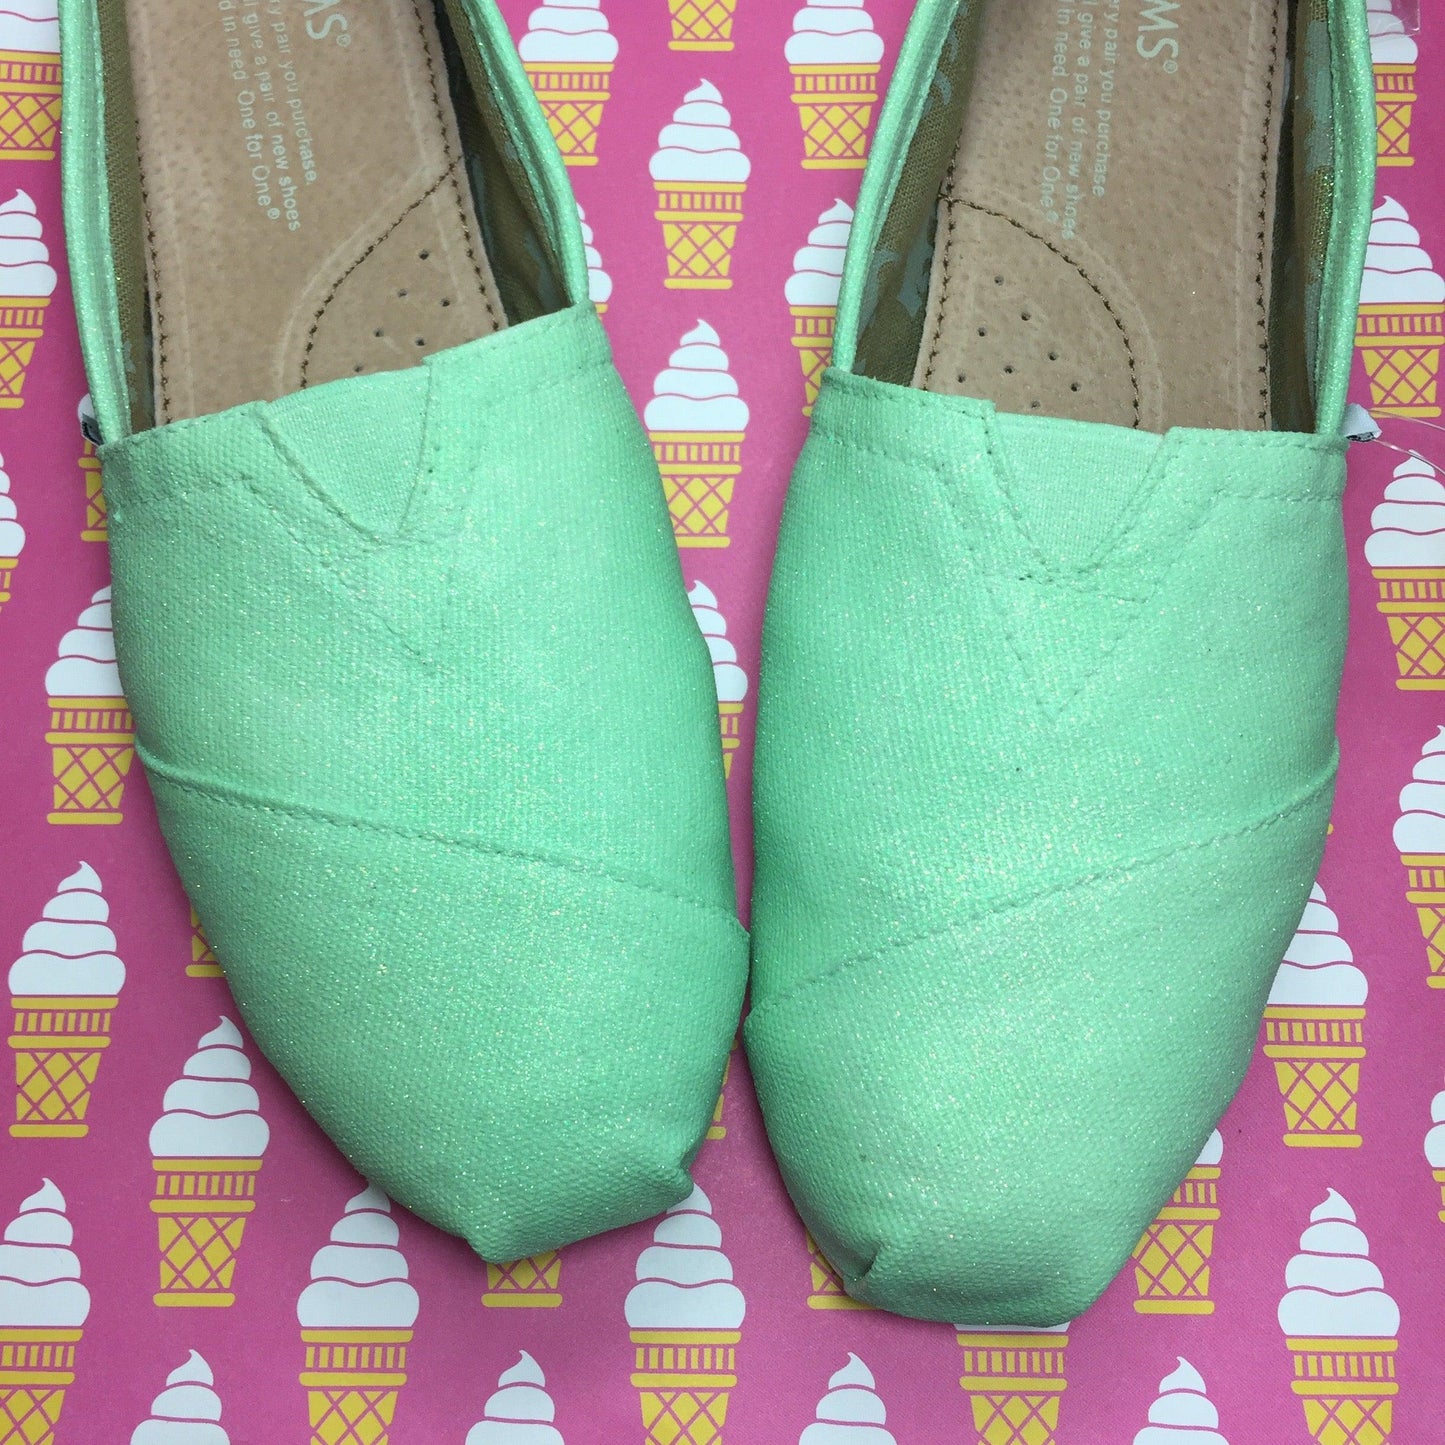 Seafoam Shoes - ButterMakesMeHappy